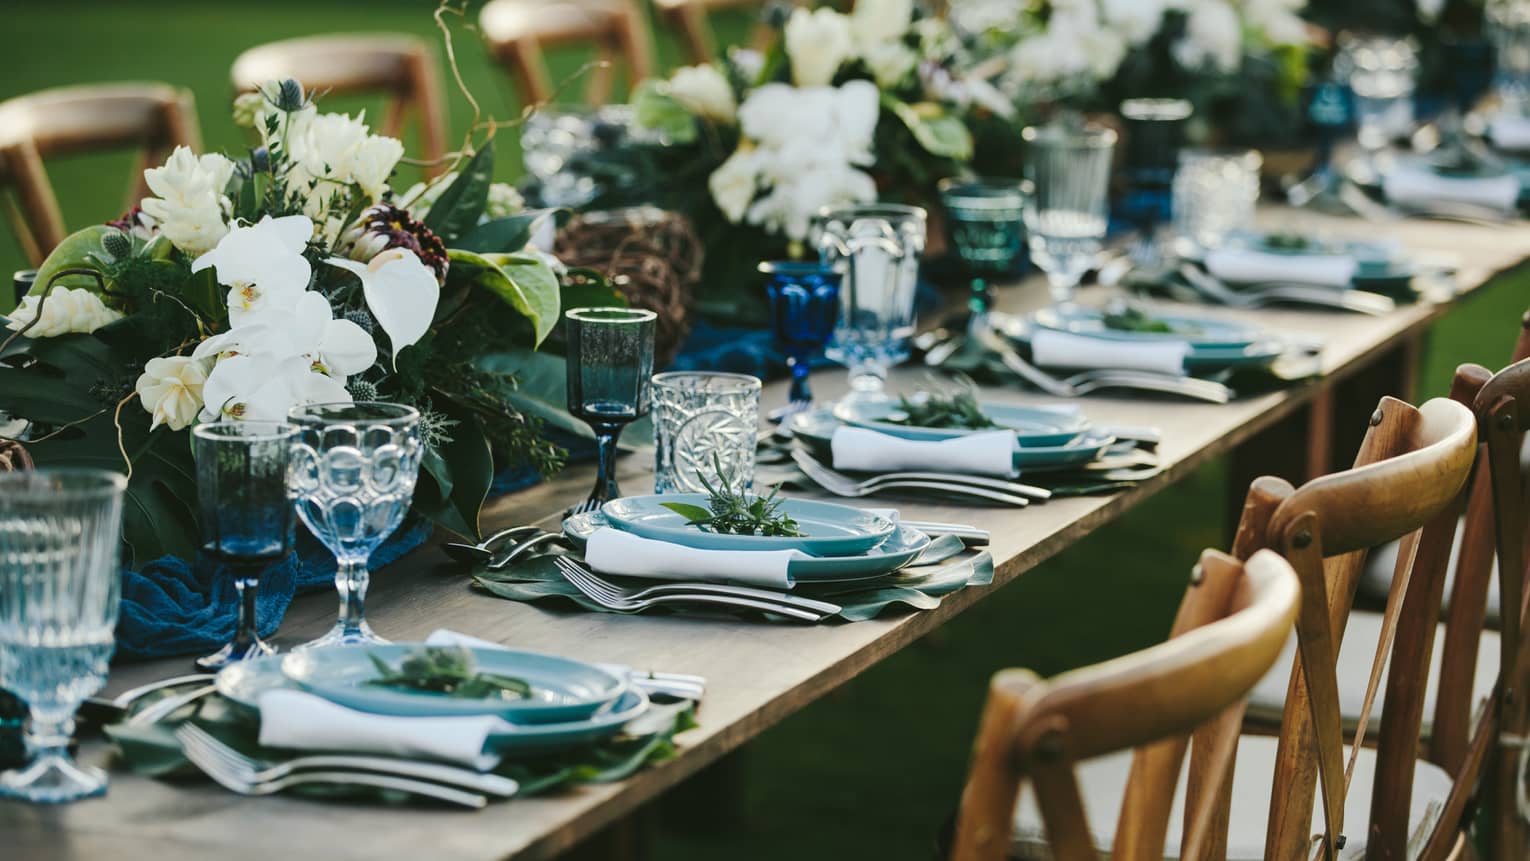 A close up of a long wooden table set with blue plates, eclectic blue and clear glassware, white napkins and green and white floral arrangements all the way down the center of the table